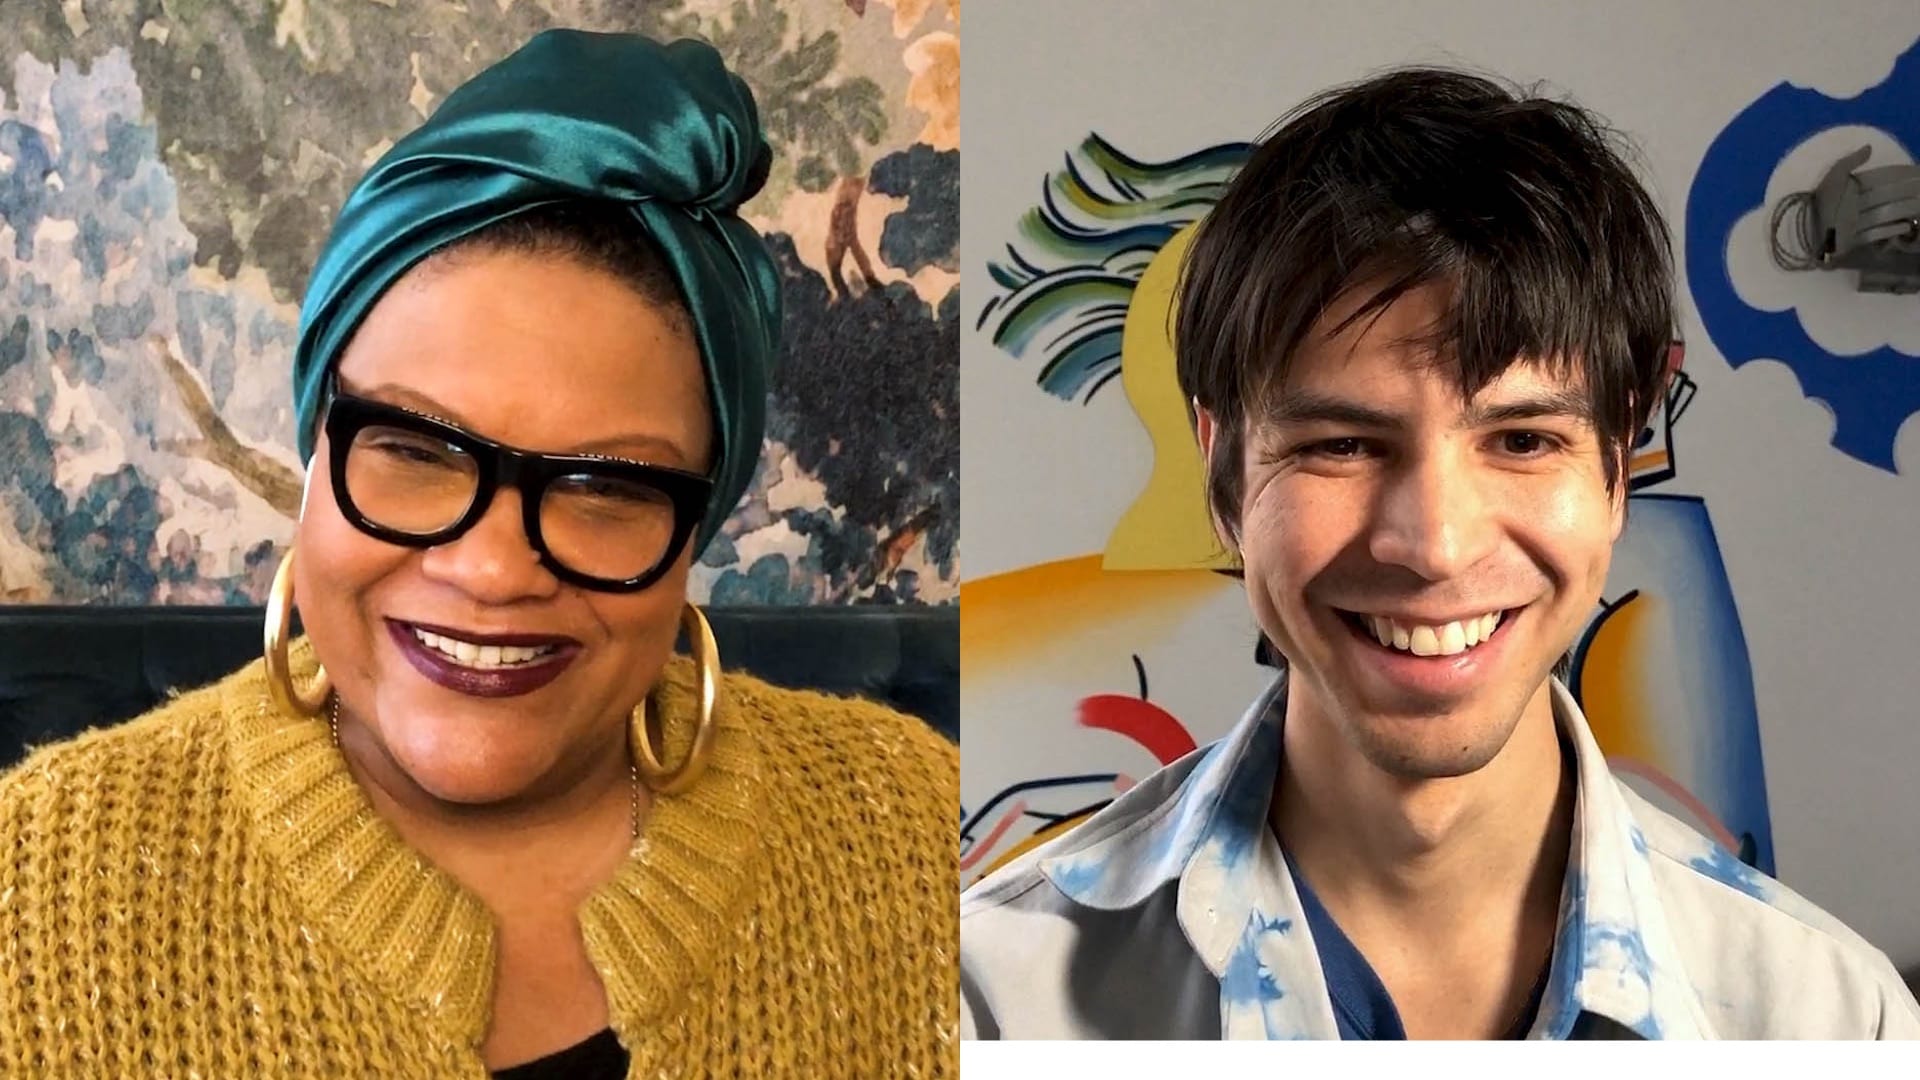 Bottomless Brunch at Colman's Season 3 Episode 1 - Sundance Film Festival with Radha Blank and Julio Torres